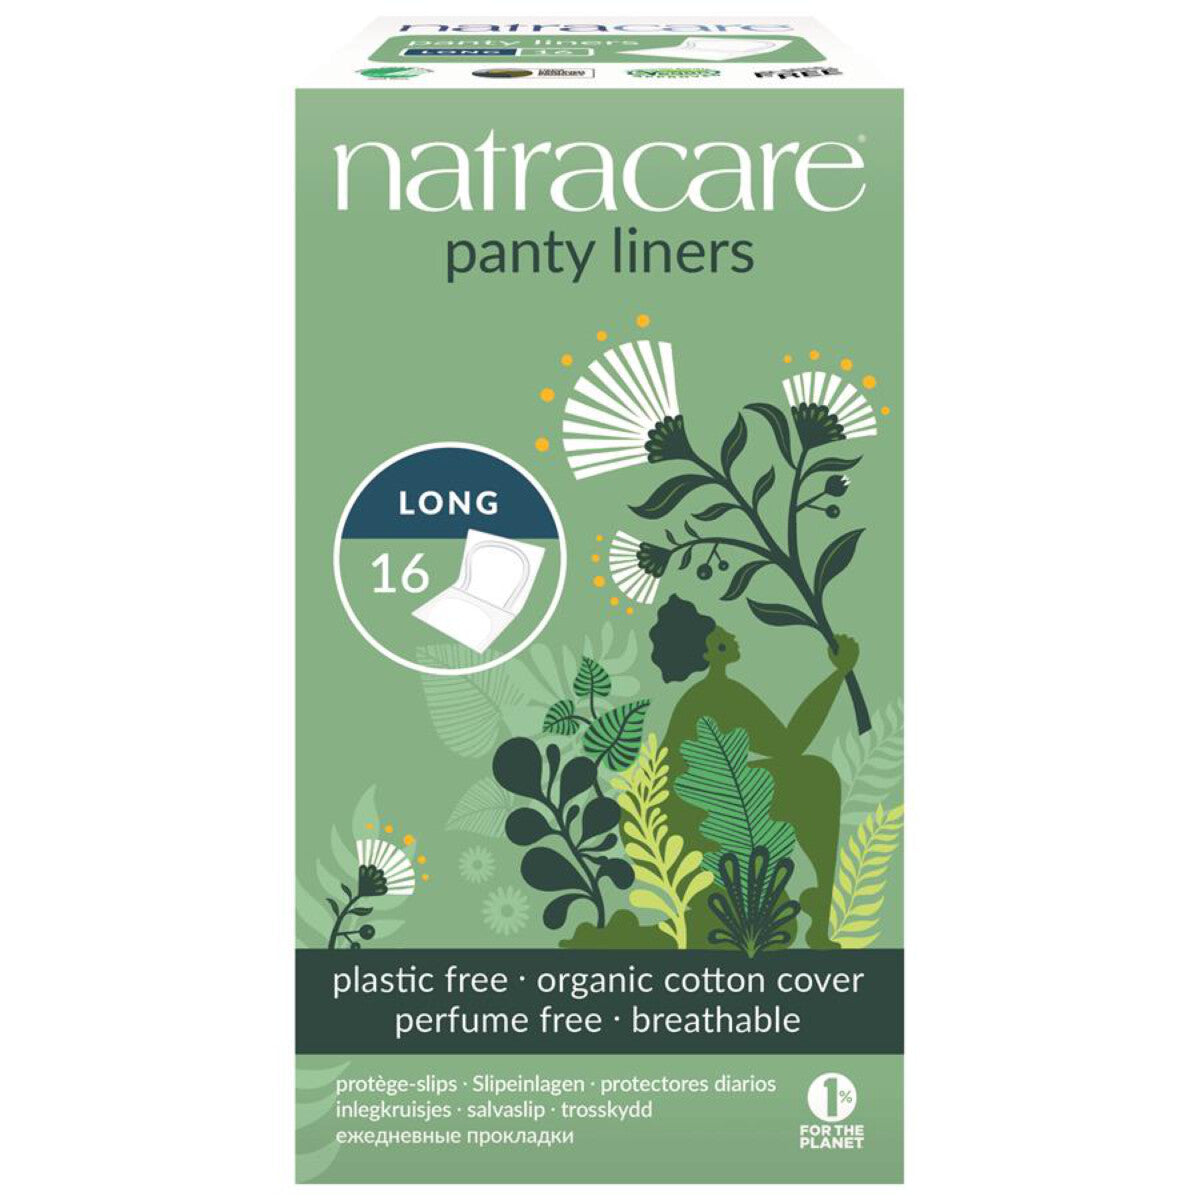 NATRACARE Panty Liners Long - 16 Stk.